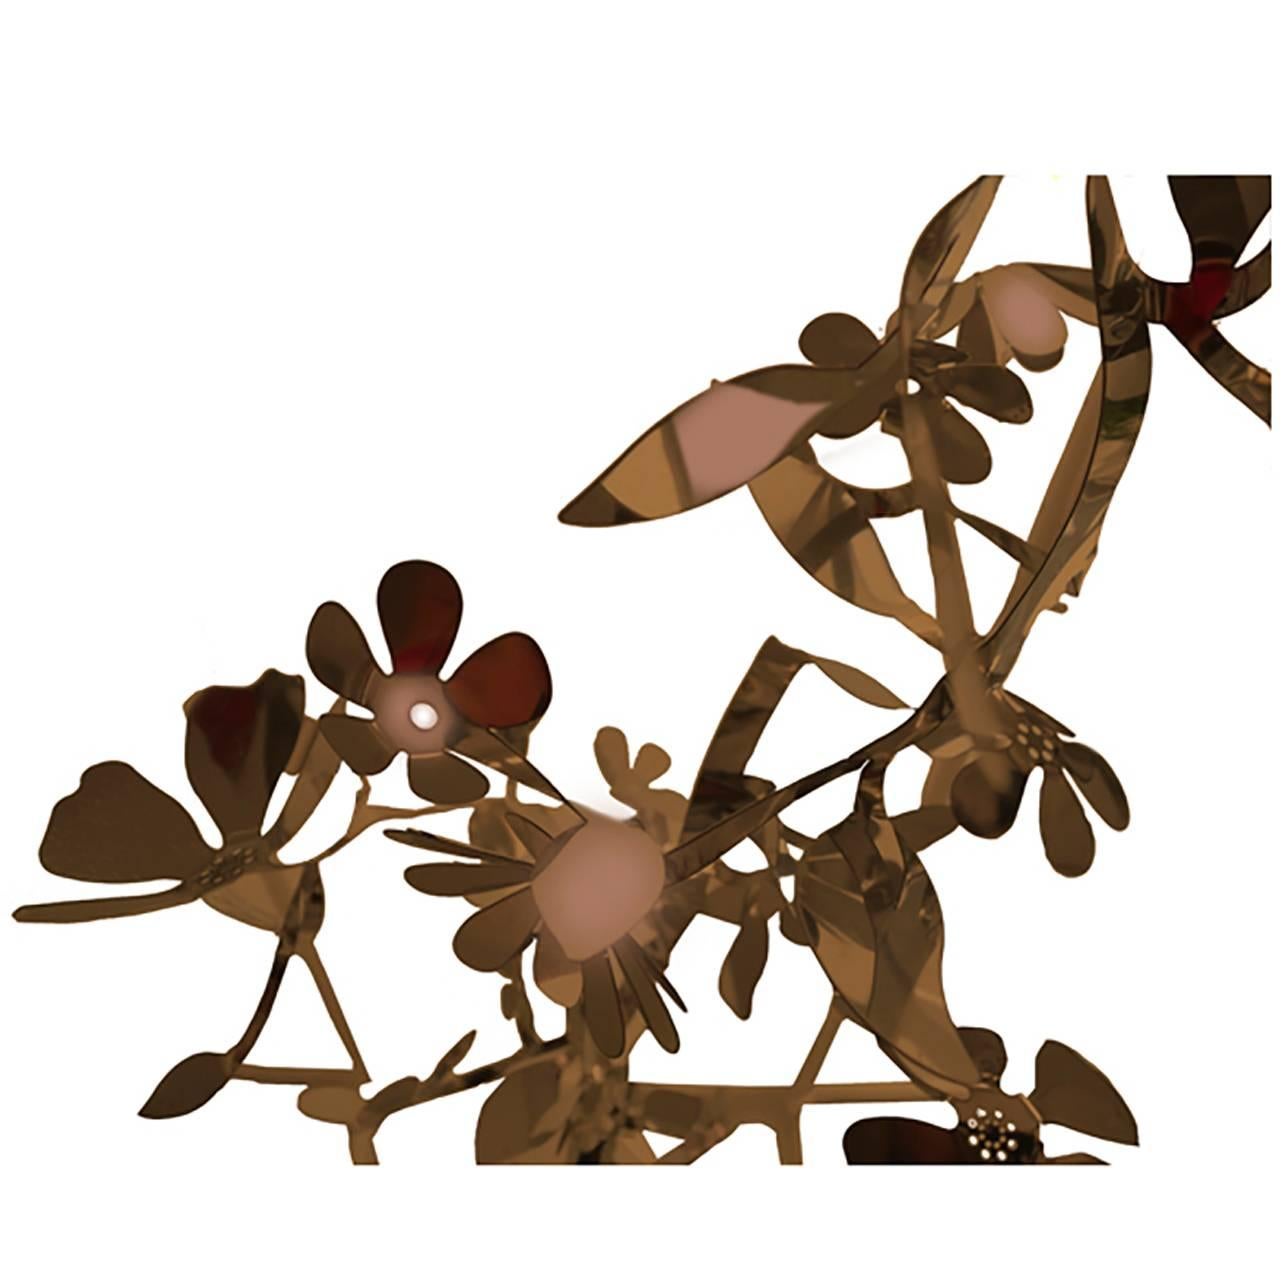 Larger than life, flora's vine like metal garland is an arresting architectural element. Crafted from 1/8” sheet metal, flora can be twisted and turned to form your favorite arrangement, and is easily suspended by a wire cable. Suitable for indoor